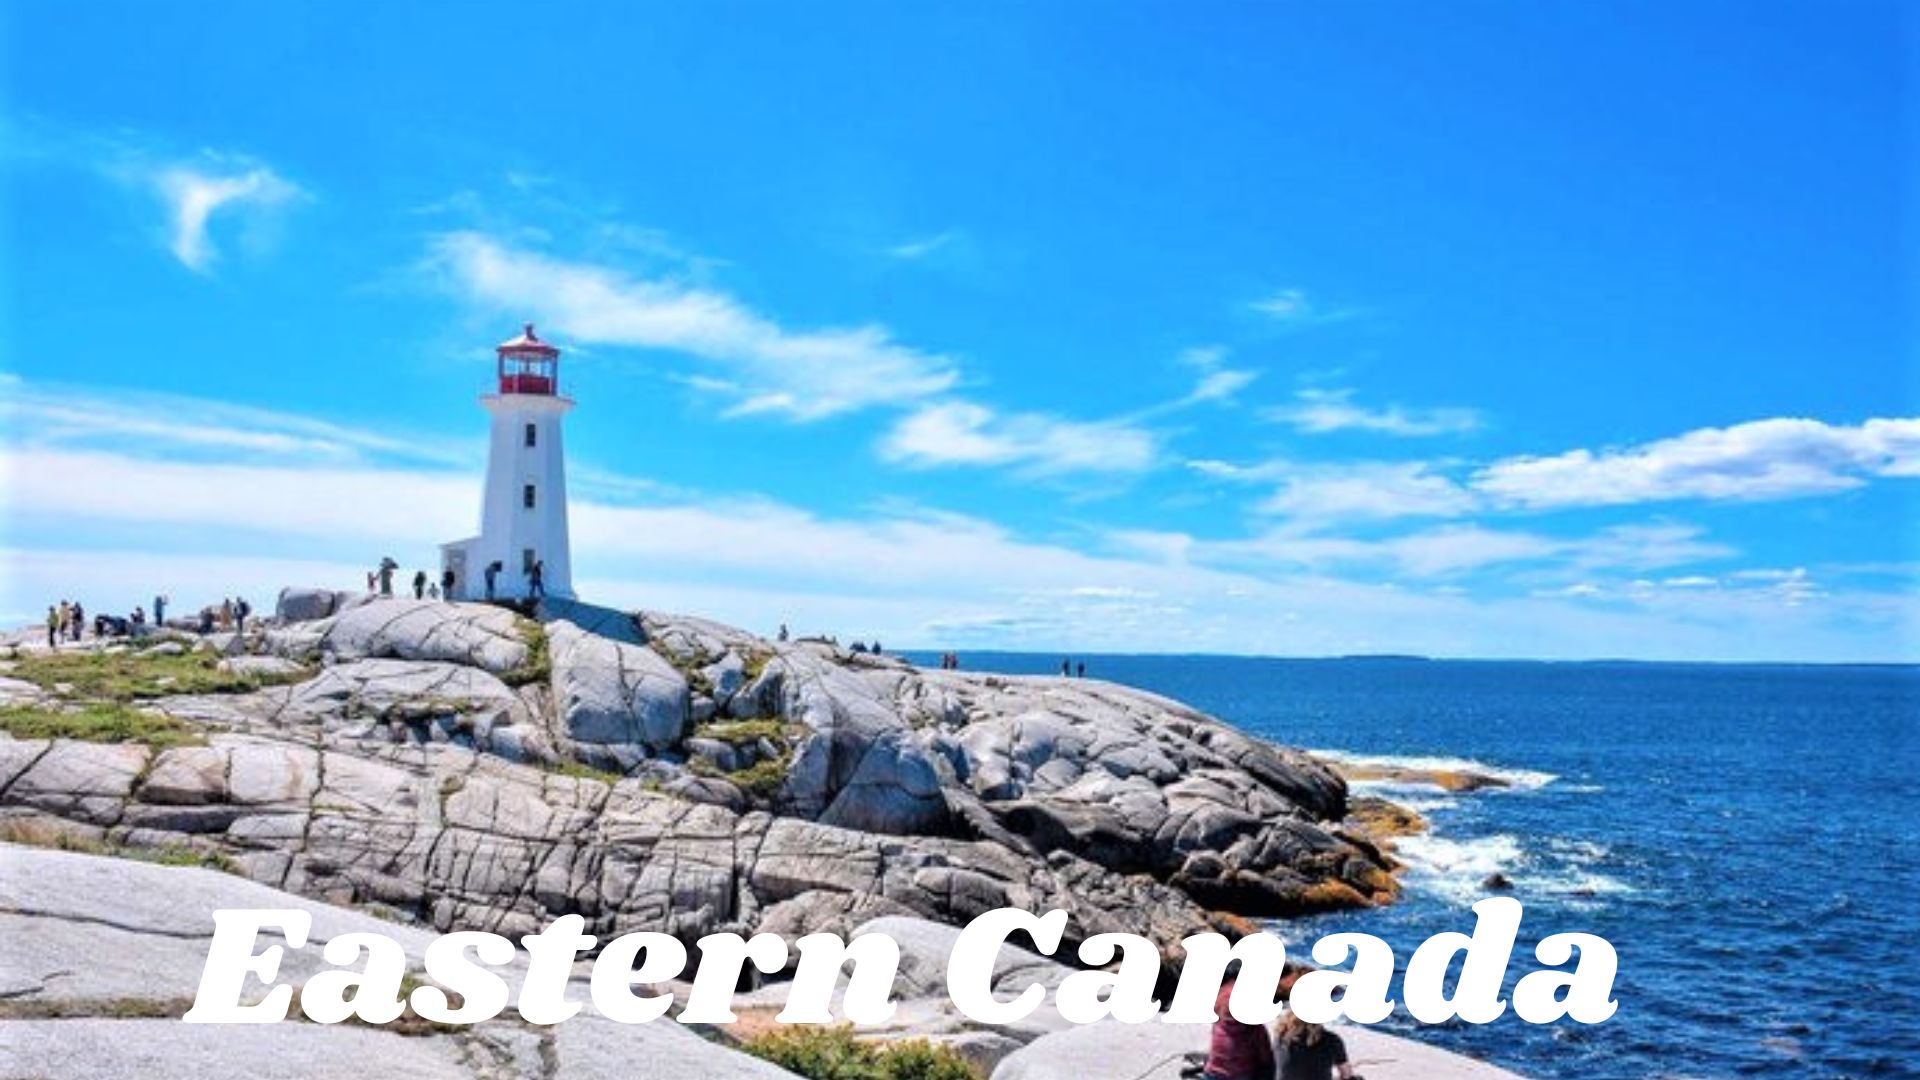 [10-Day Eastern Canada] Maritimes 10 Days Tour, Visit Niagara Falls, Quebec, Montreal, PEI, Bonfire Party, Free Upgrade to Quebec Hotel Suite Room, Toronto Airport Pick Up